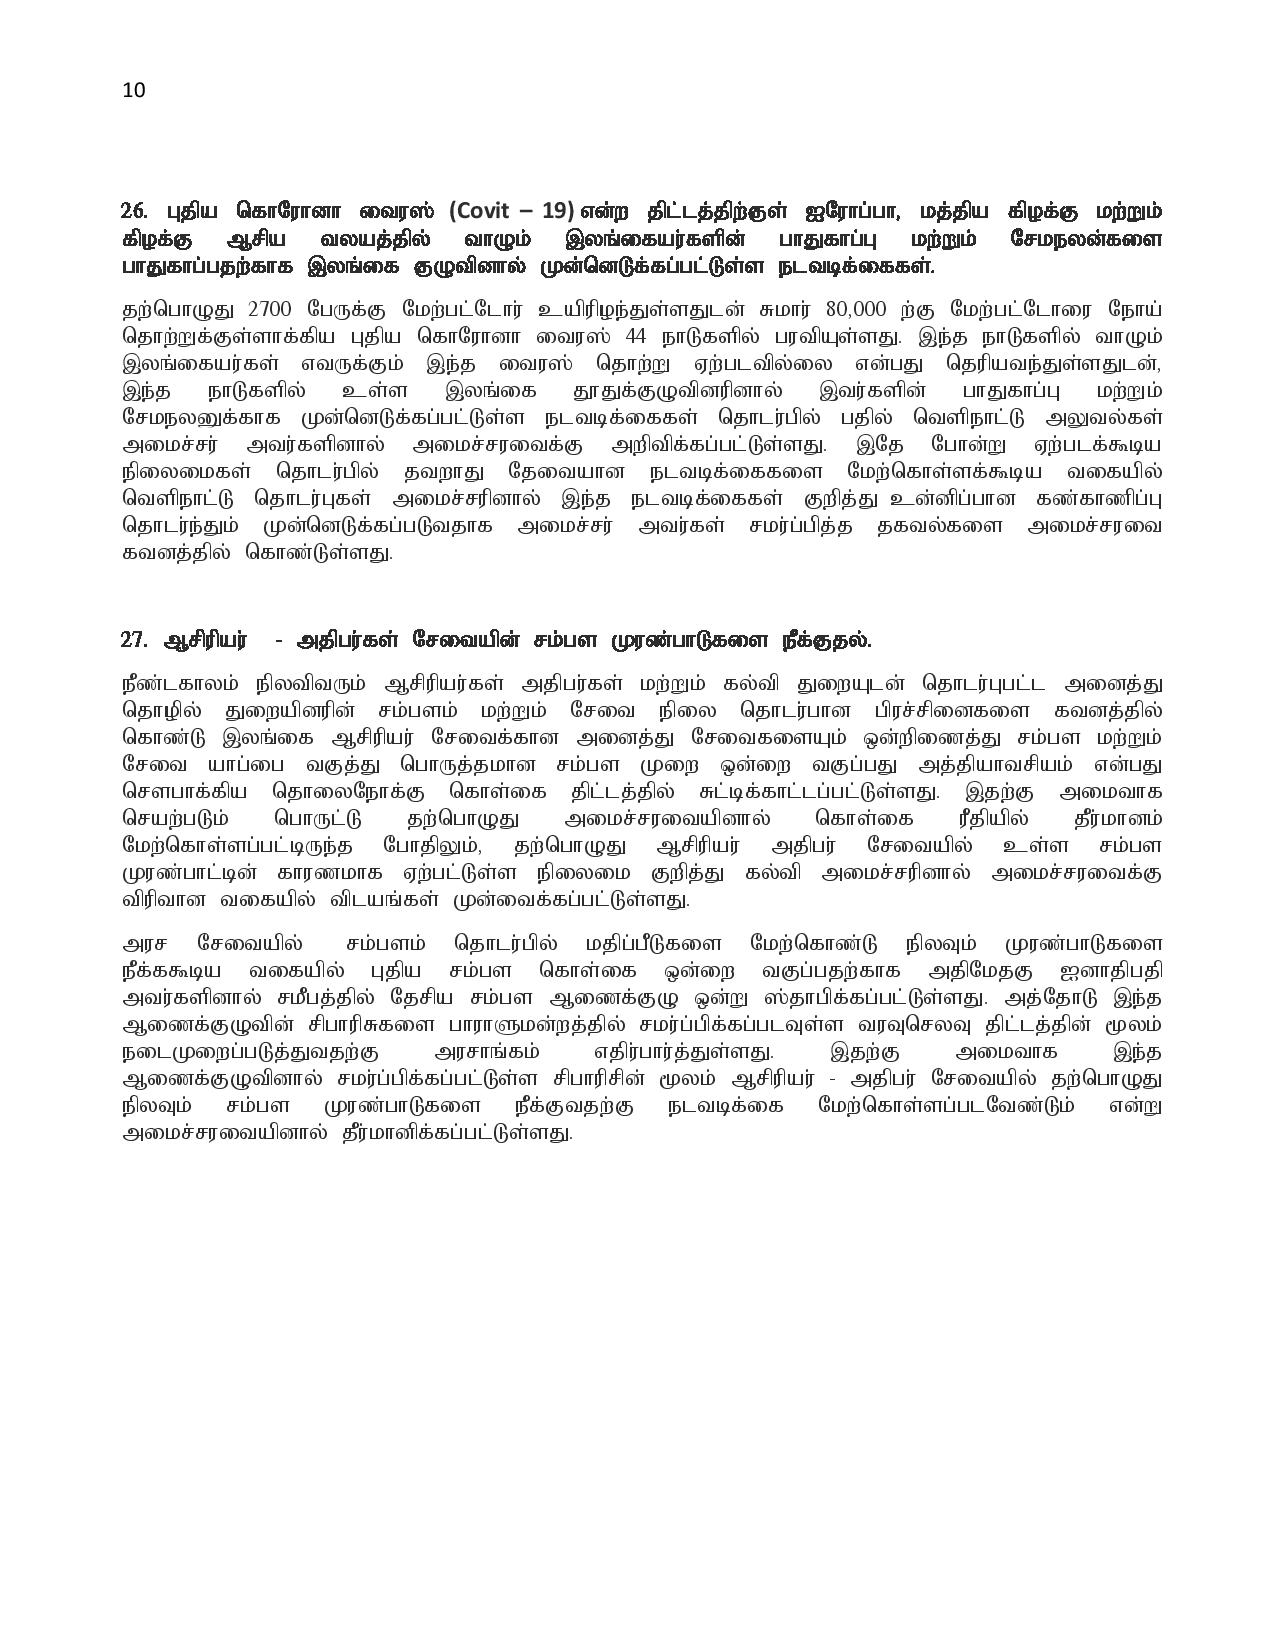 2020.02.27 cabinet tamil page 010